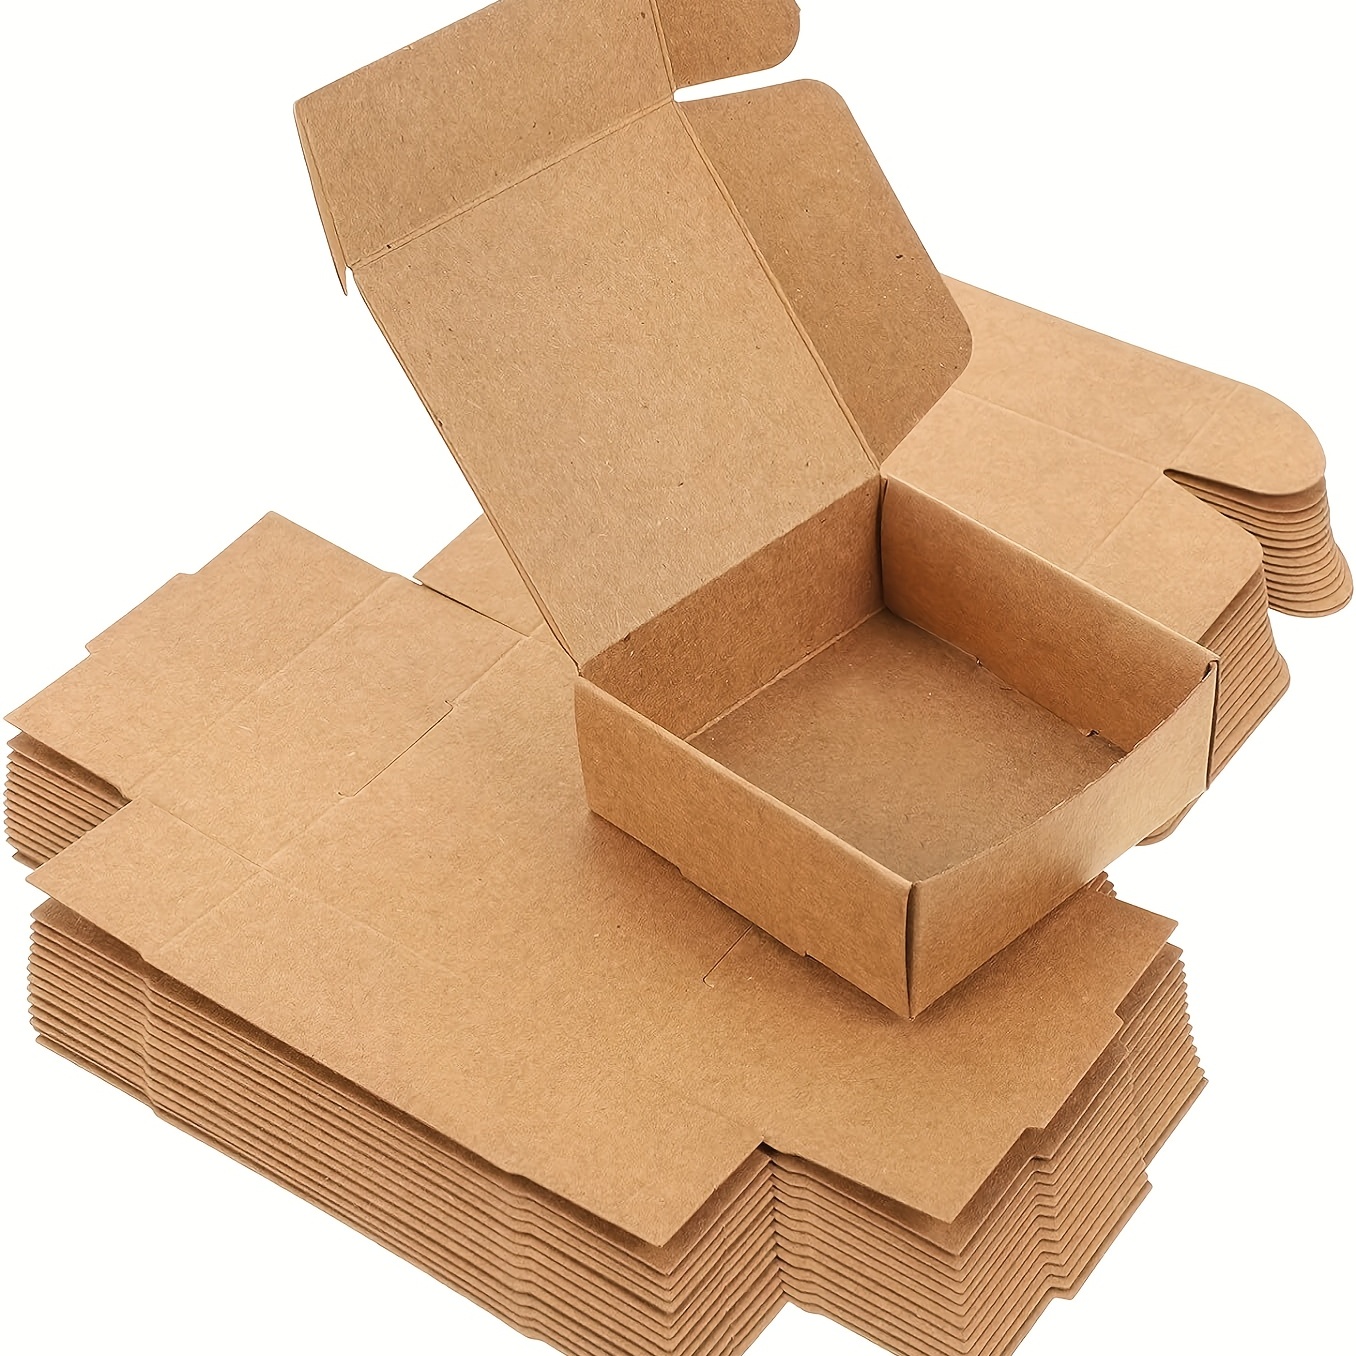 Packaging Supplies Small Businesses